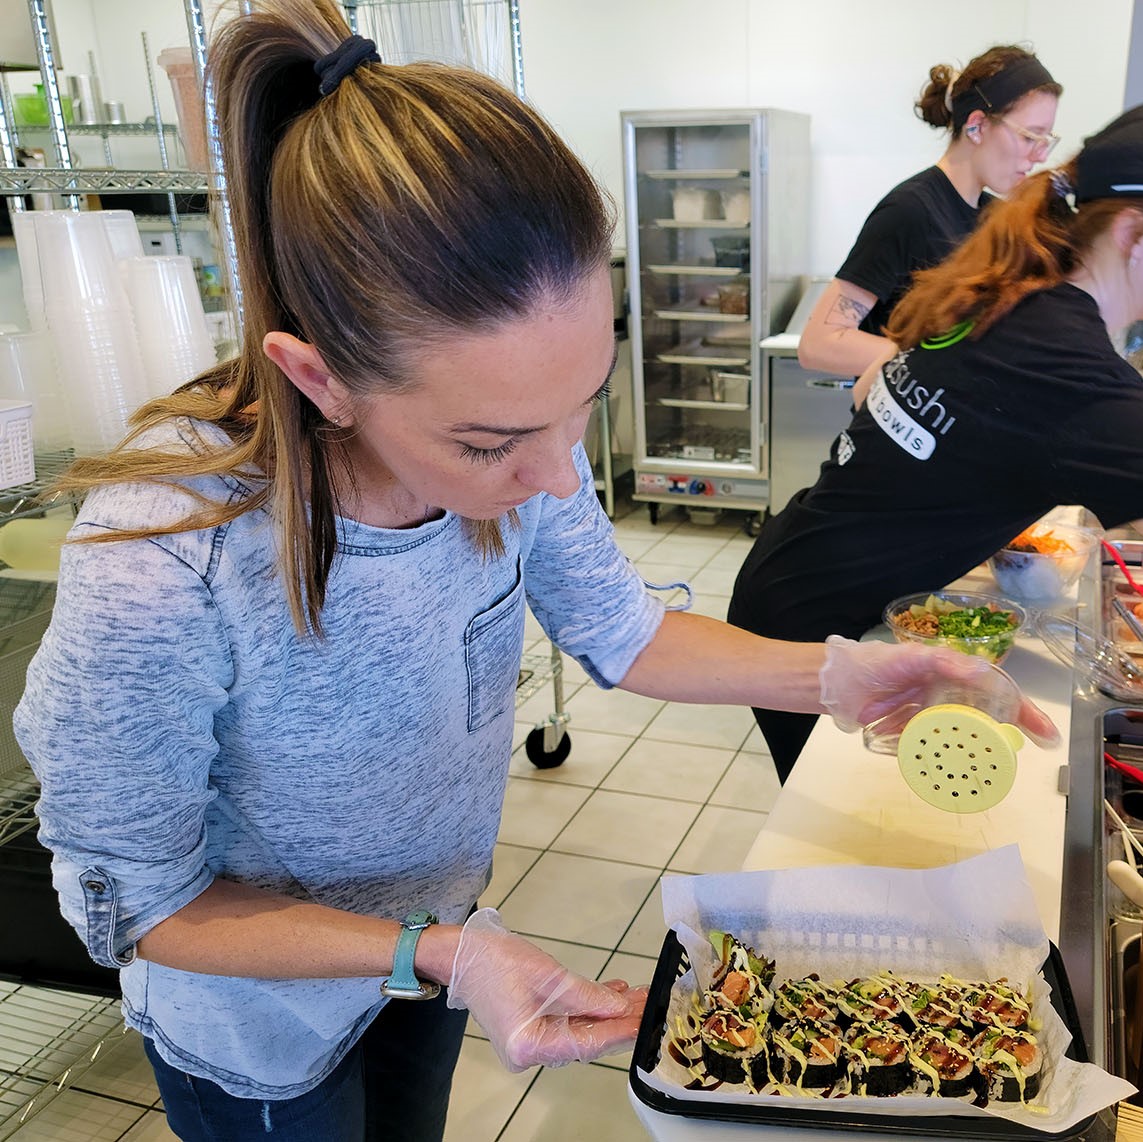 A woman in a restaurant kitchen prepares a sushi roll